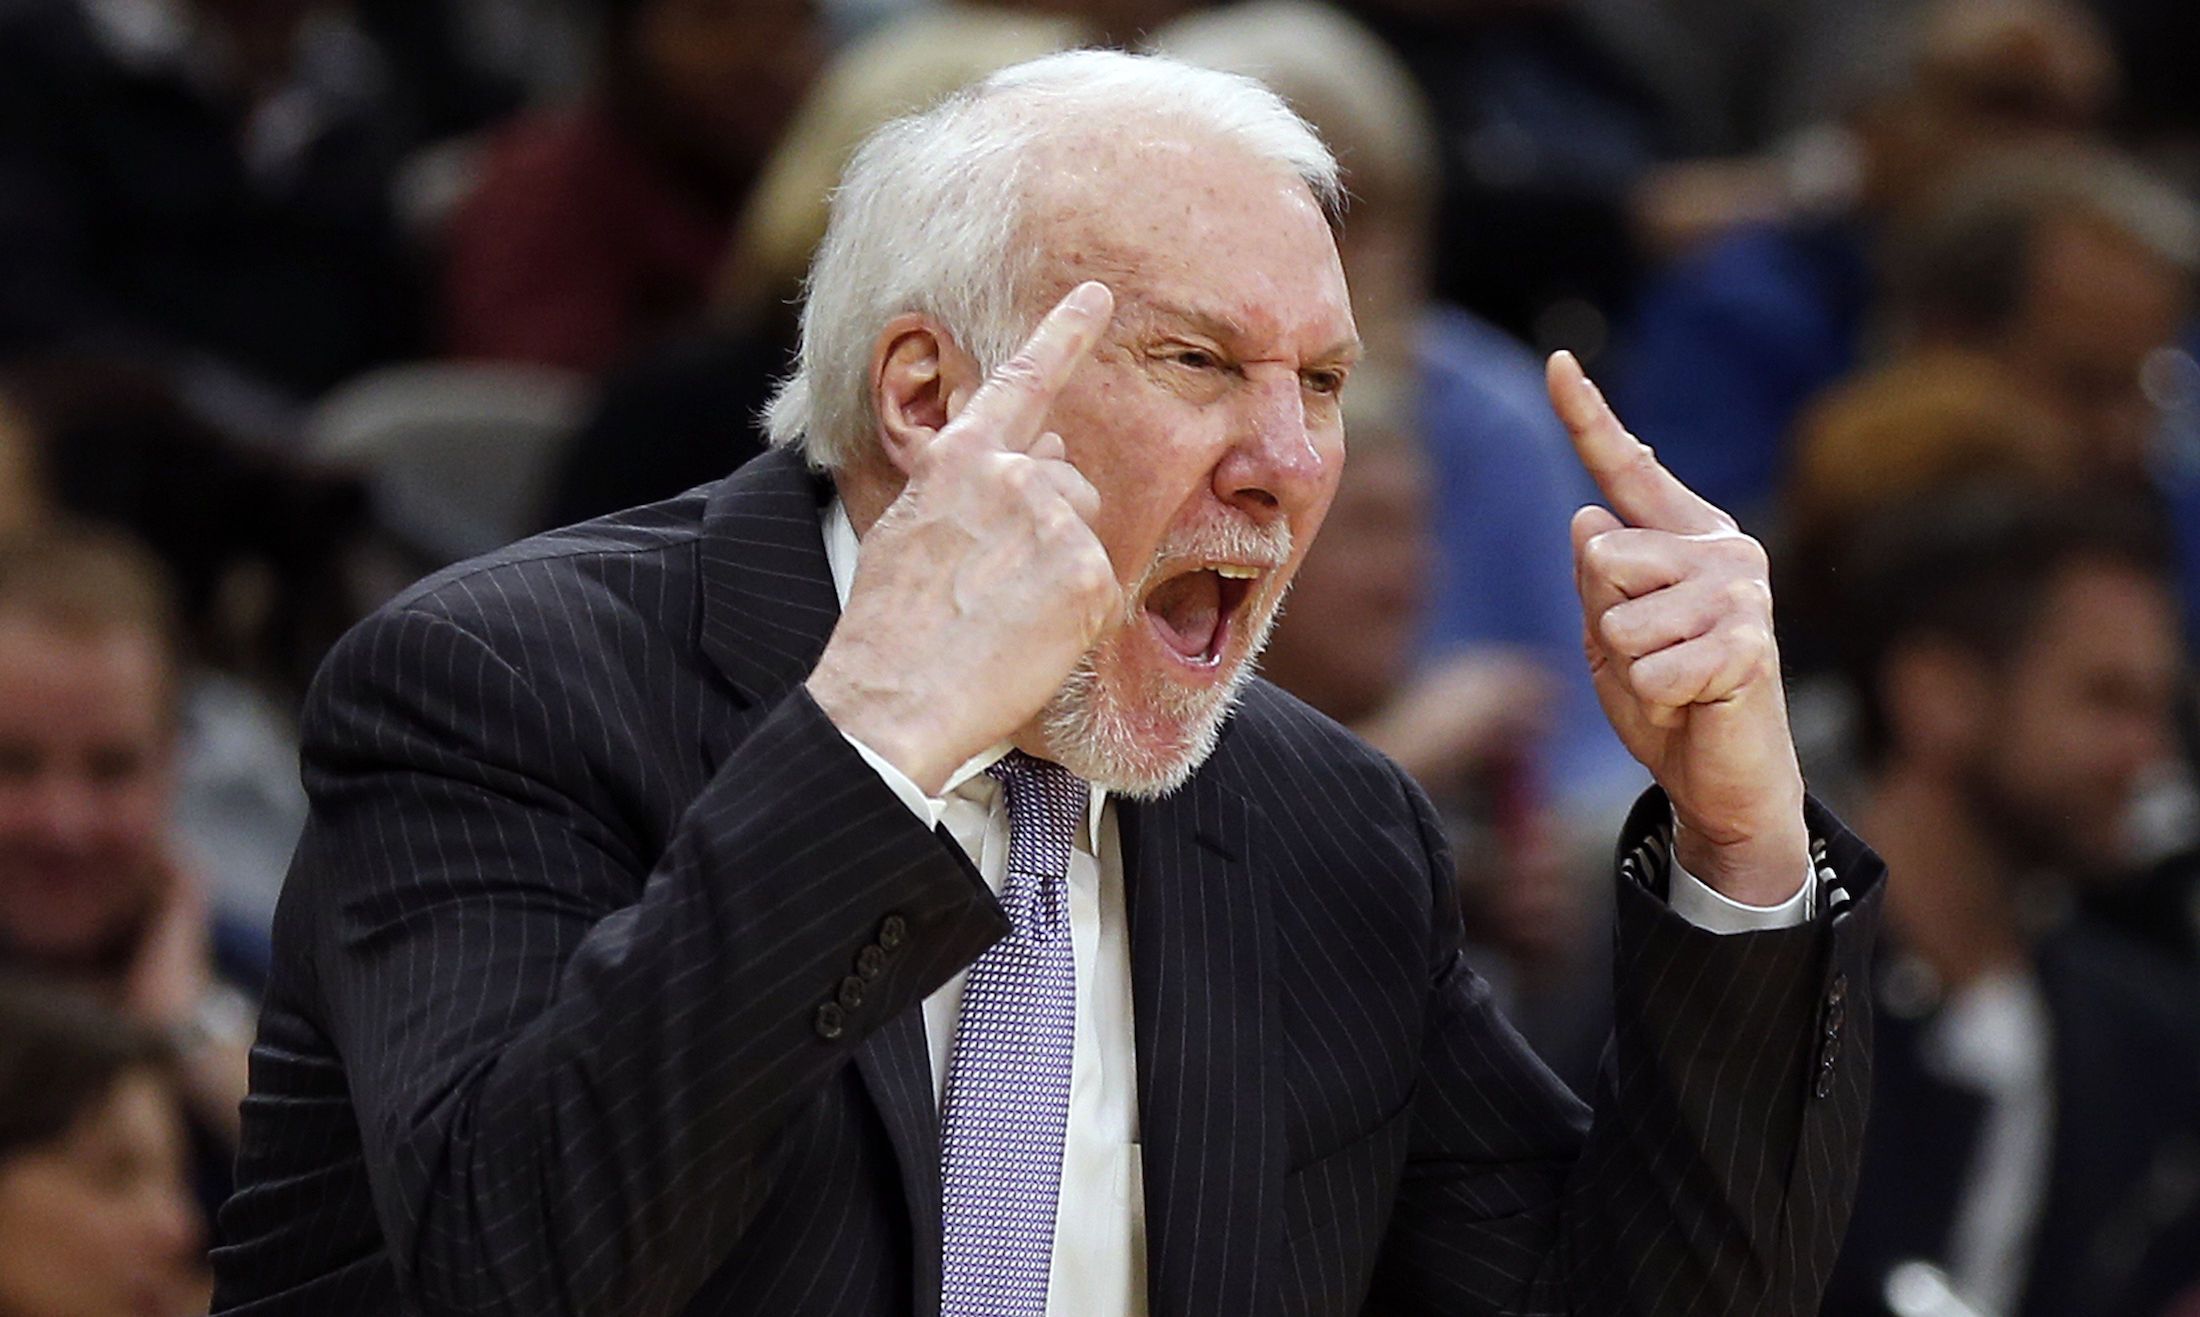 Gregg Popovich isn't afraid to call out Donald Trump of Texas' Republican leadership.